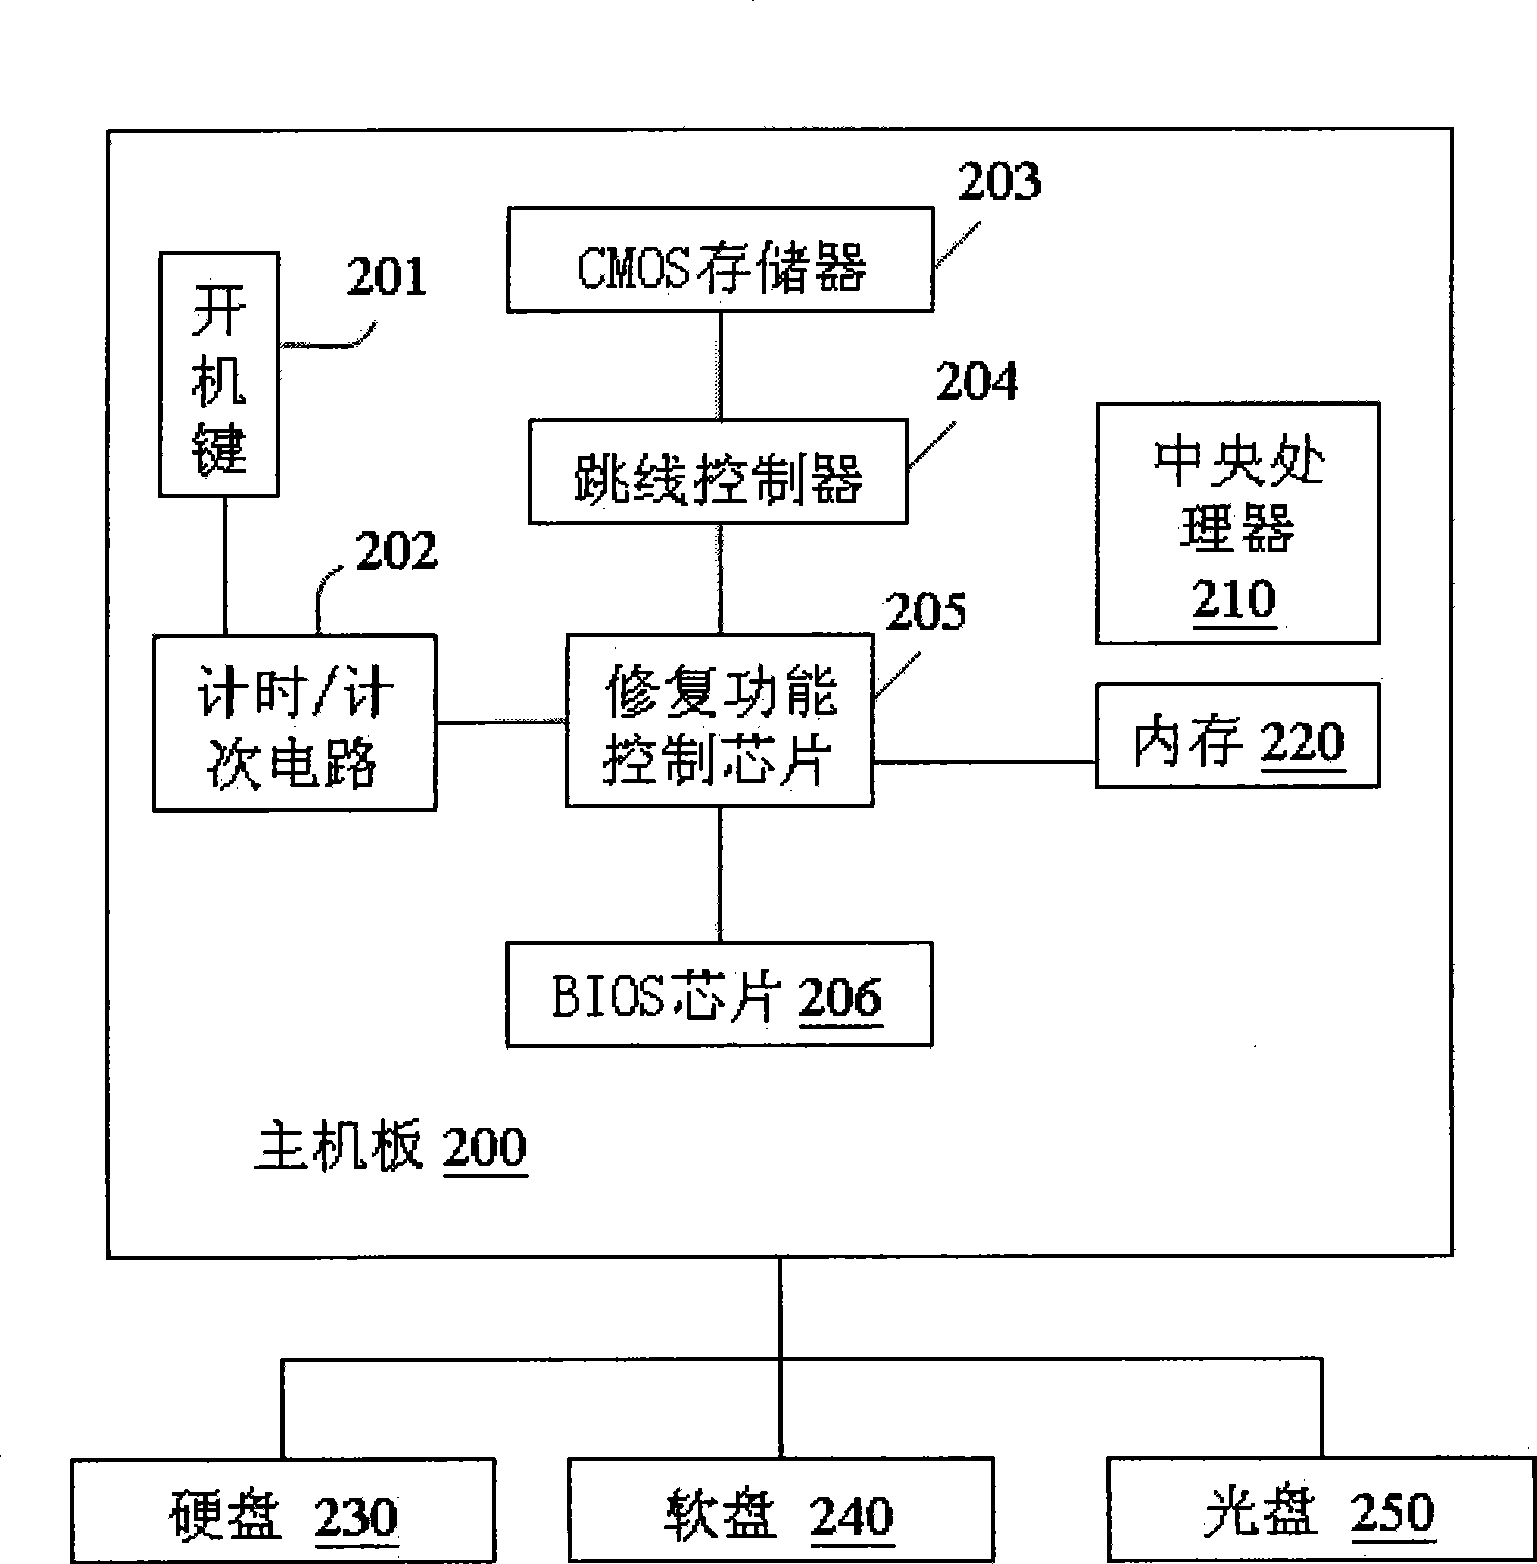 Single-key controlled method for automatically repairing system configuration